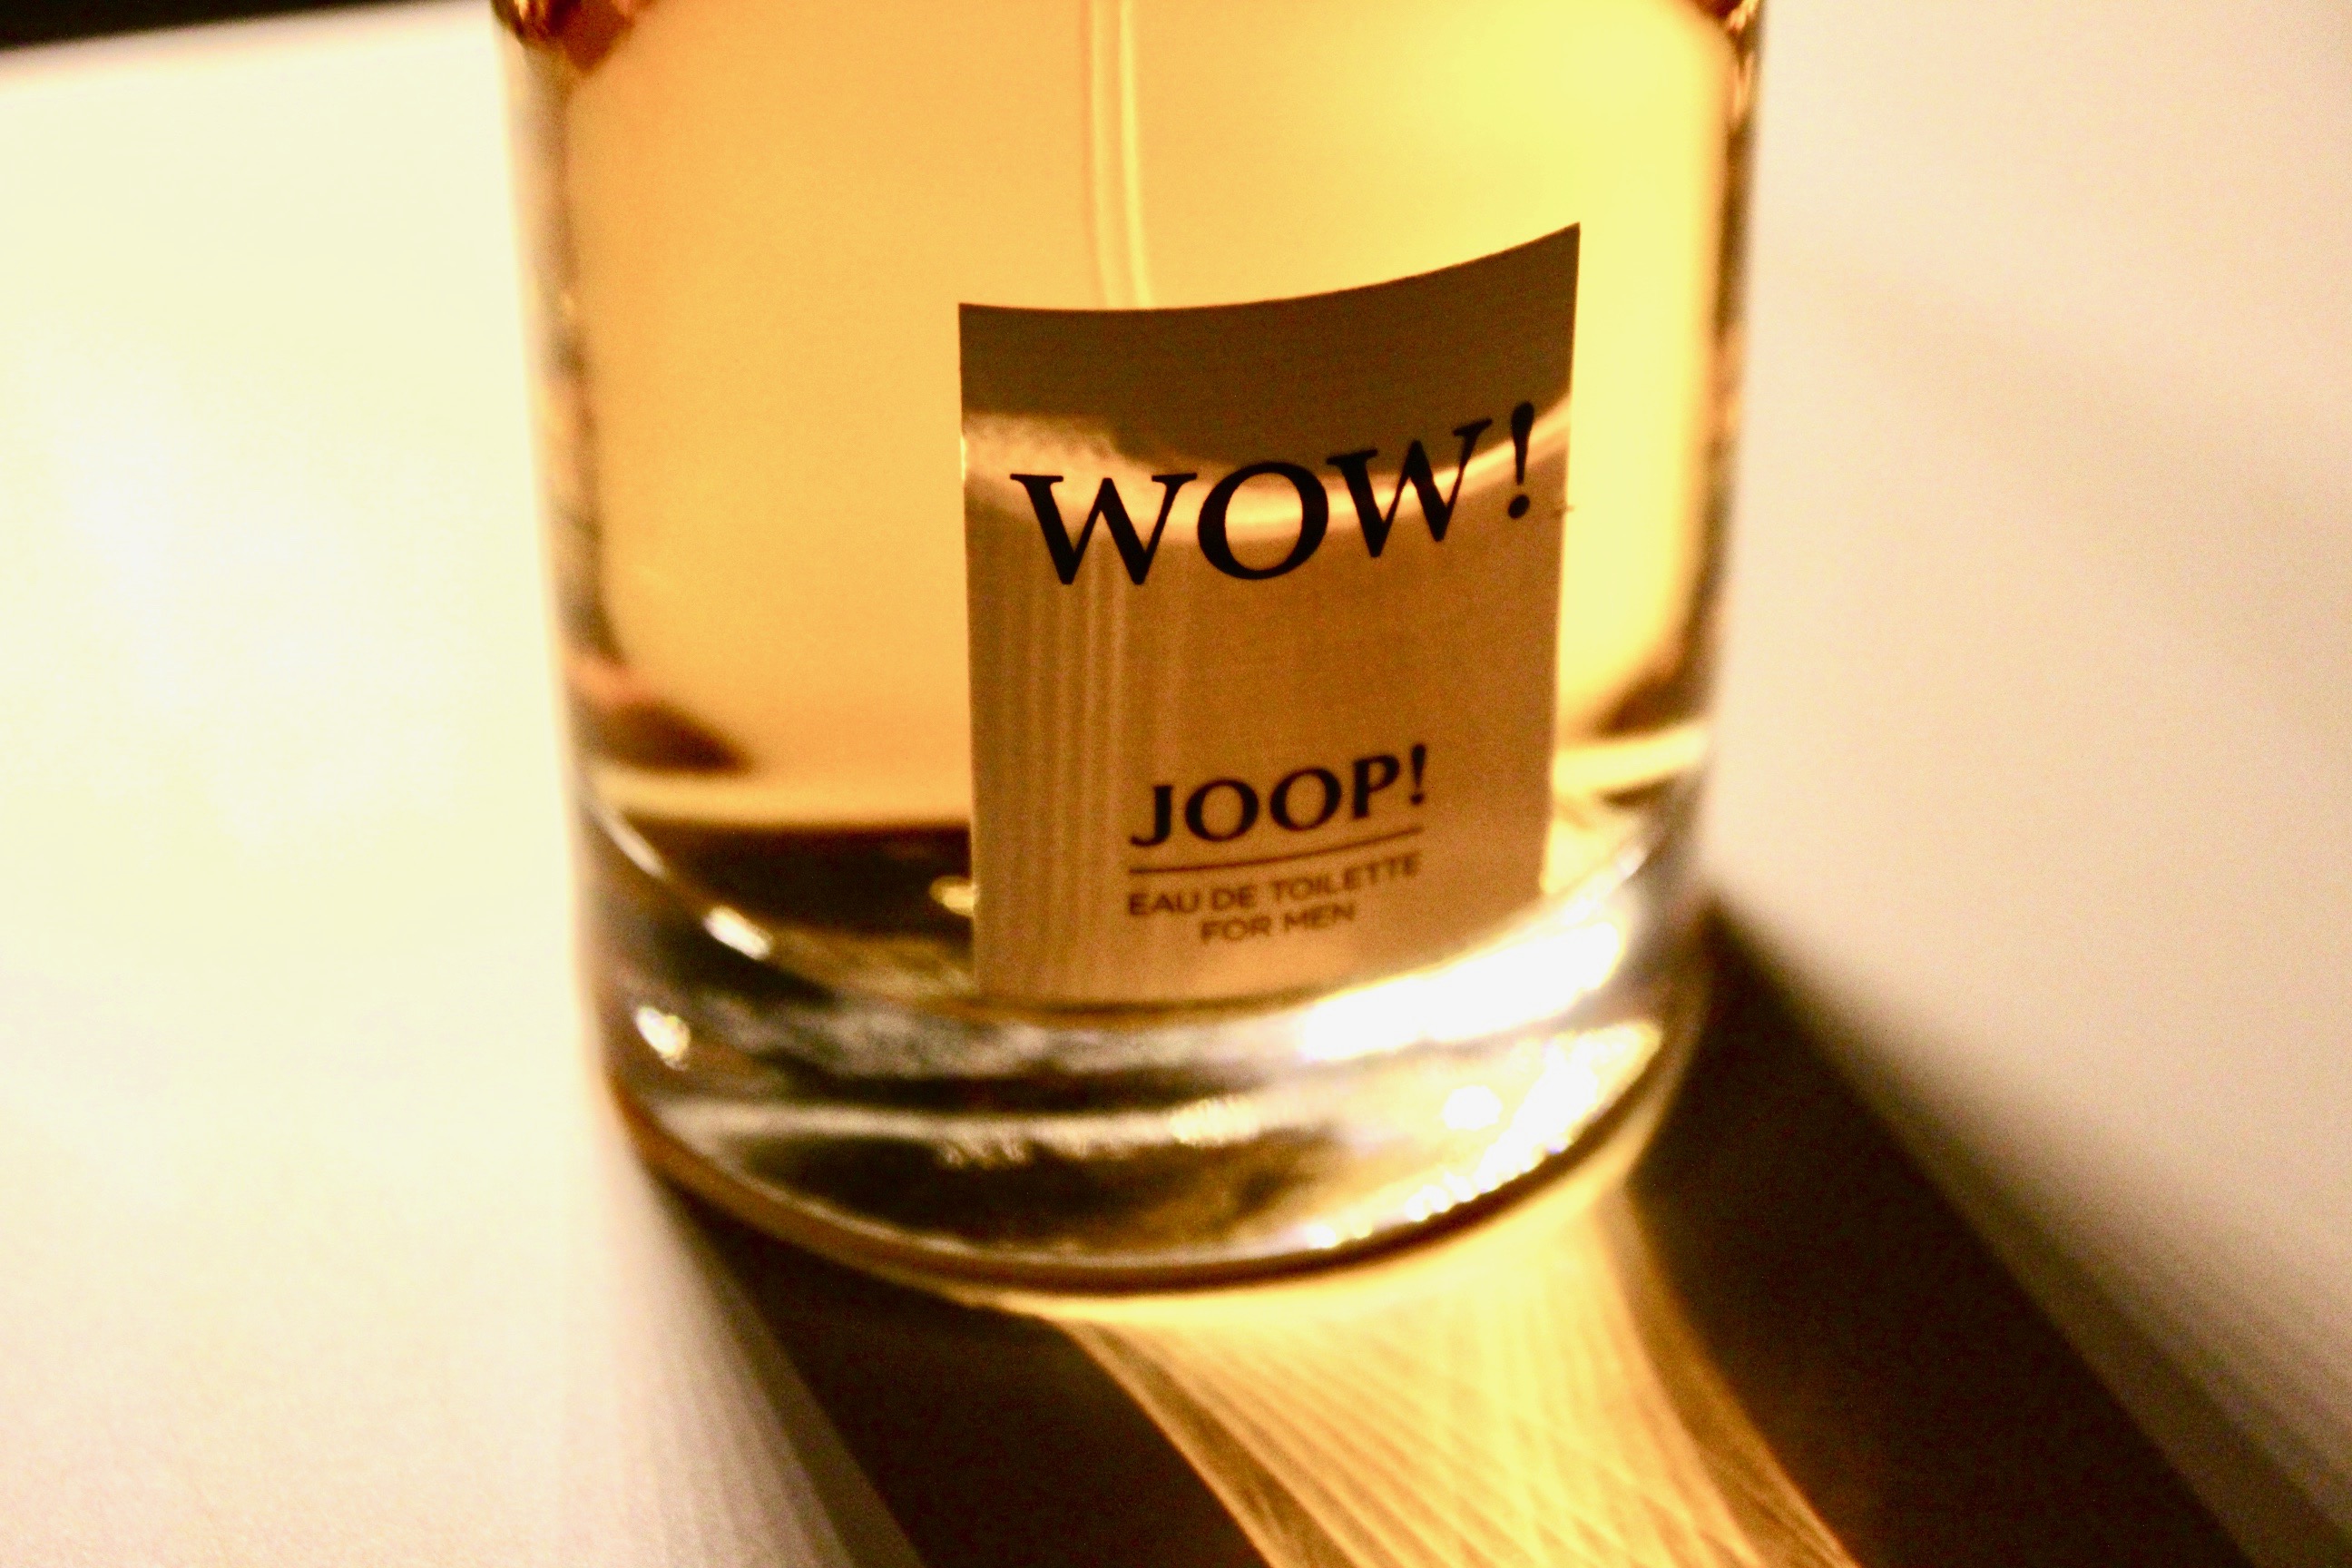 Perfume Review: Wow! by Joop! – The Candy Perfume Boy